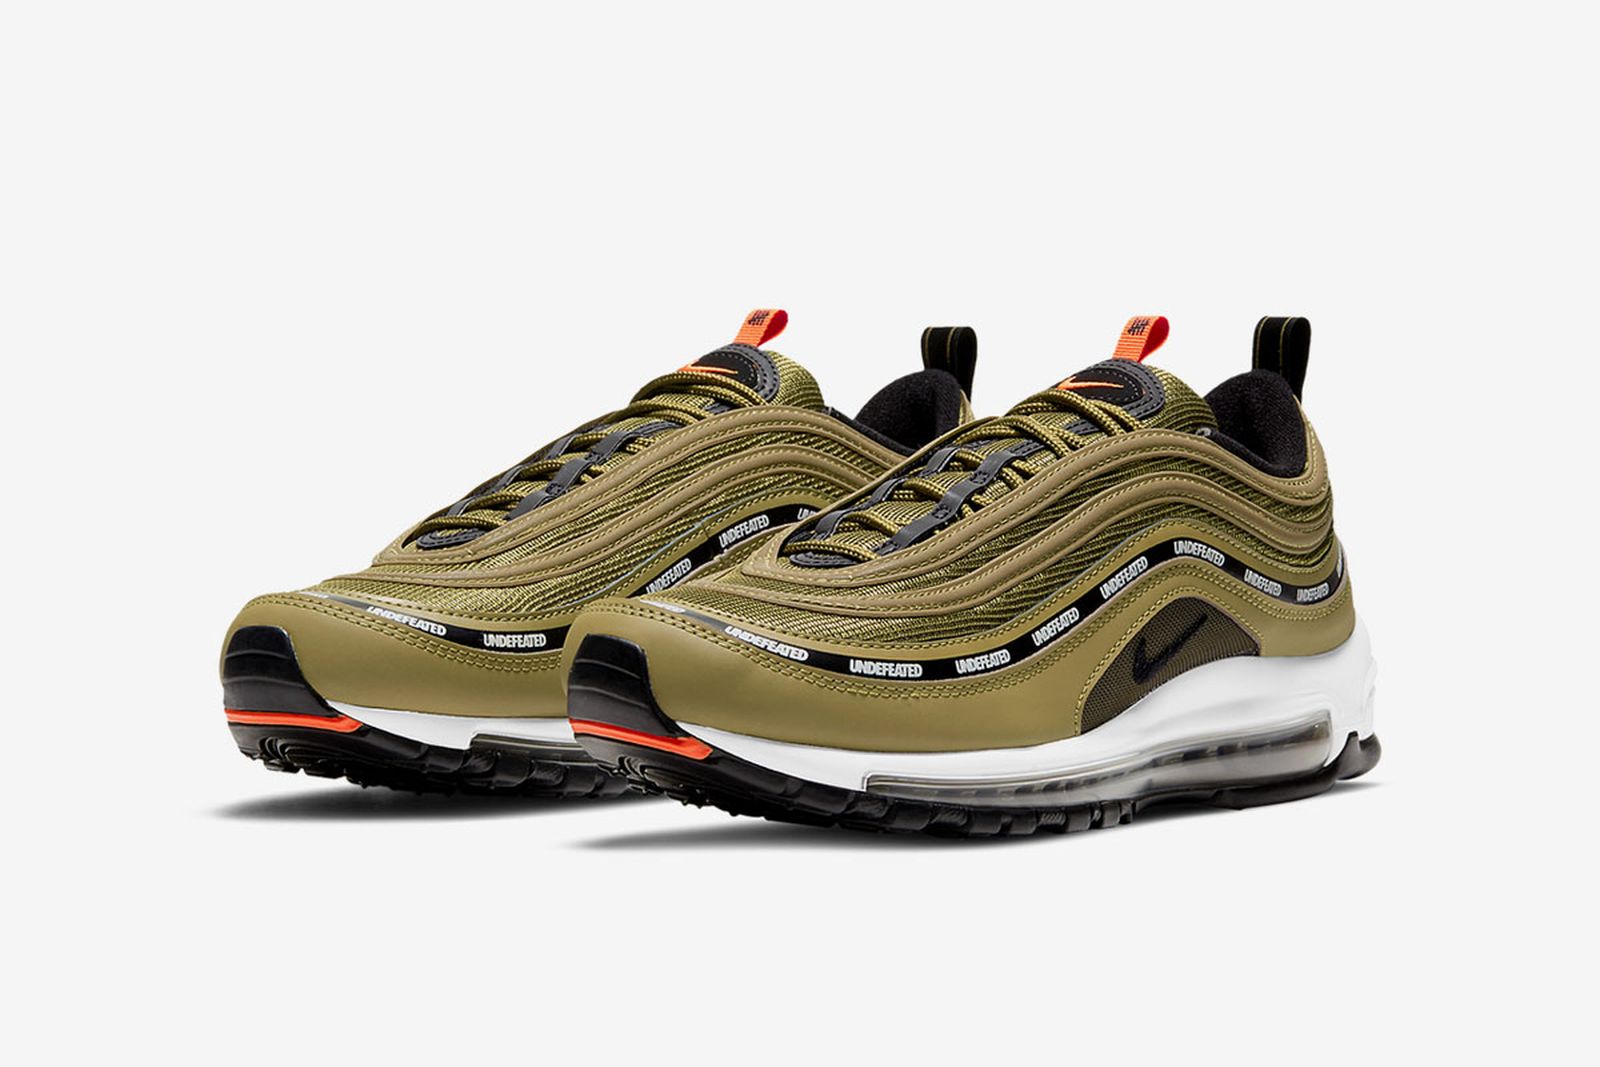 UNDEFEATED x Nike Max 97: First Look & Rumored Info